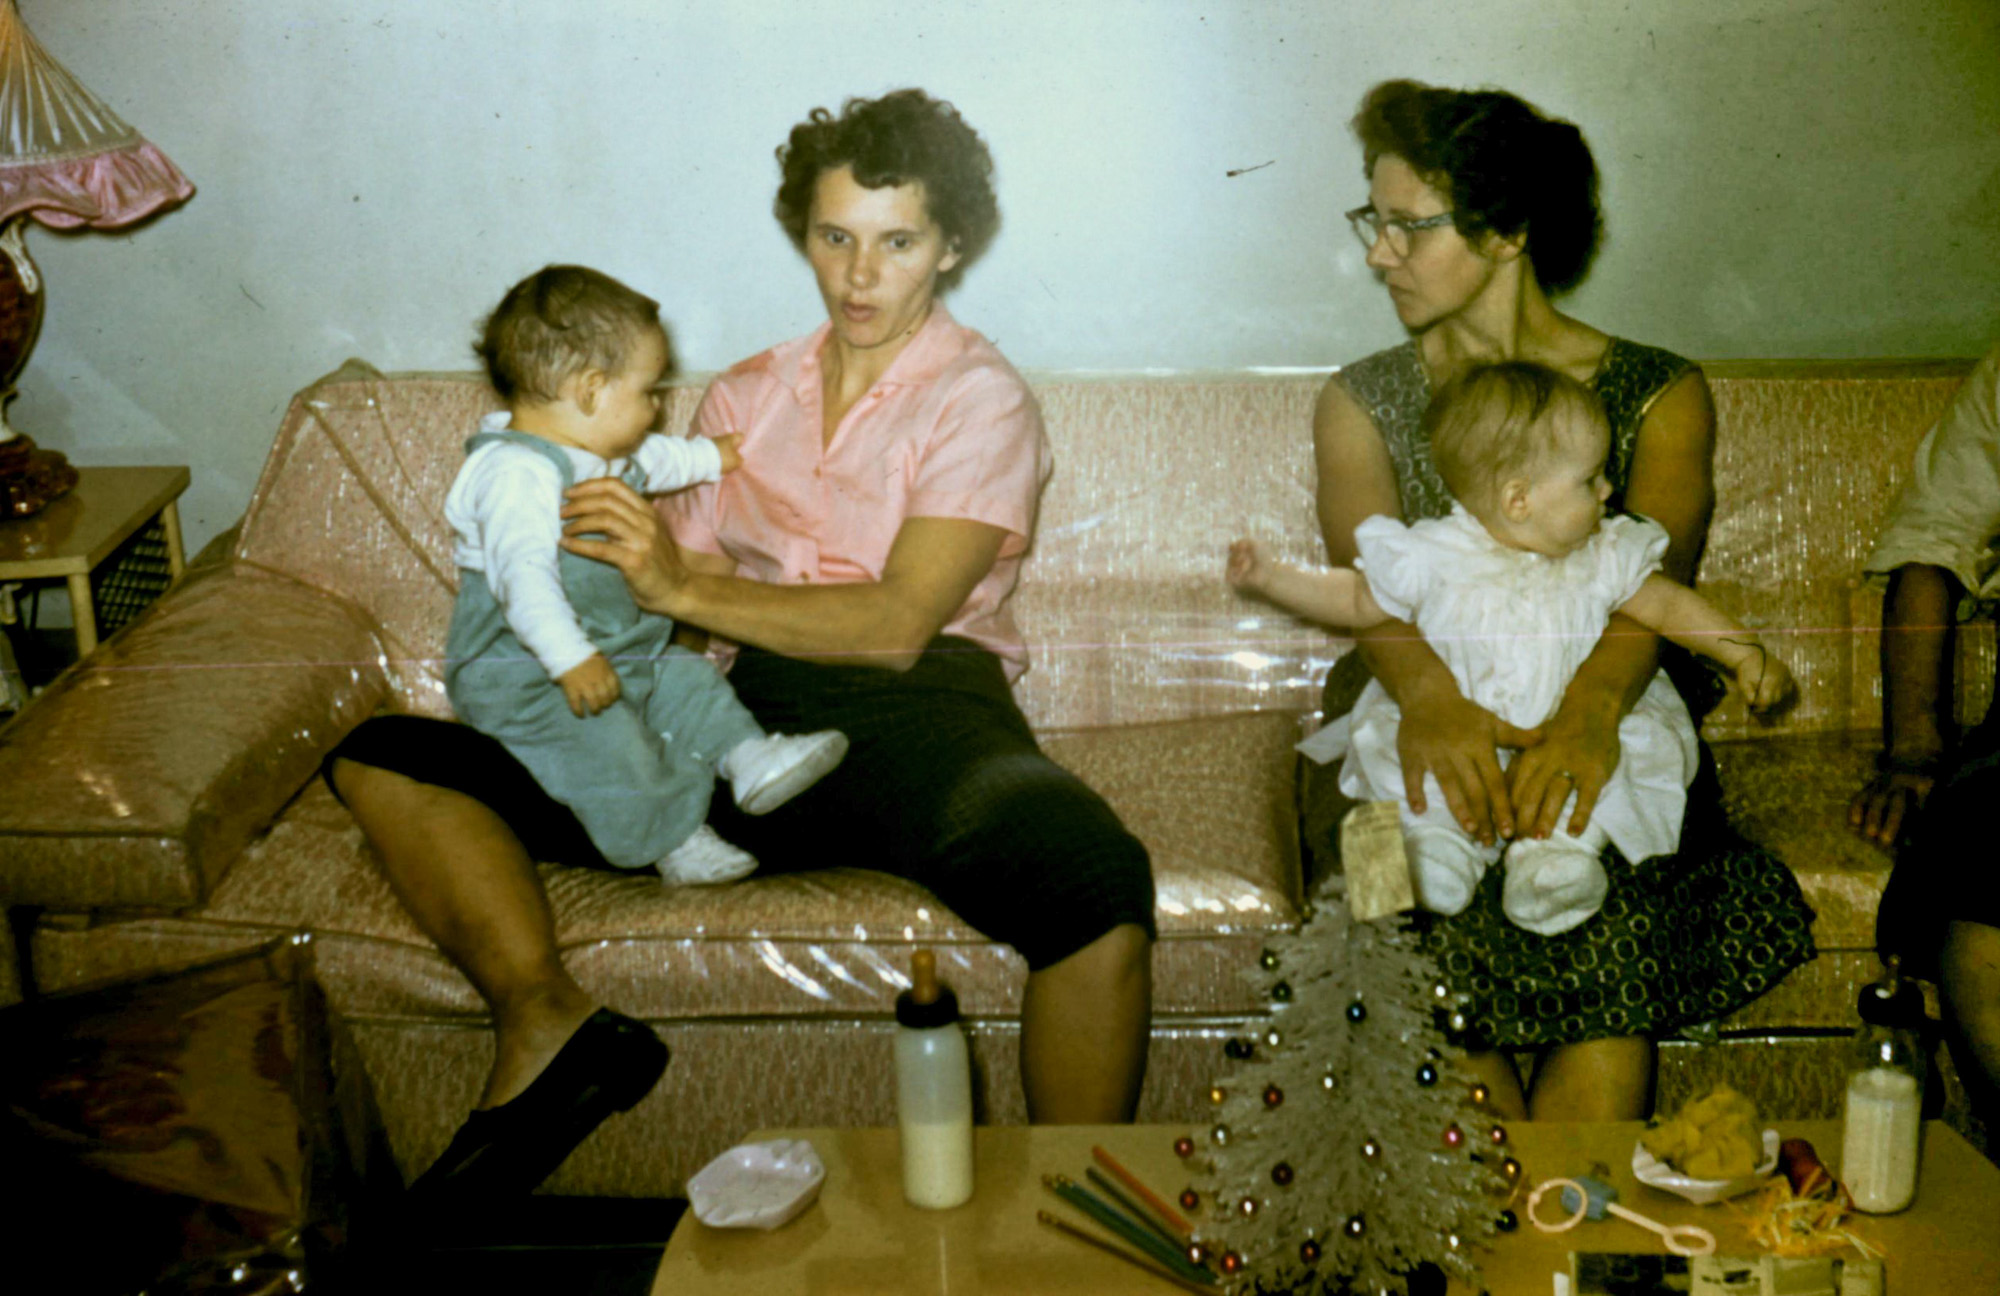 Kodachrome taken in my grandmothers living room. Her sister Marge to the left and my grandma holding my aunt Candy on the right. Taken during Christmas 1958 in Chicago Illinois. View full size.